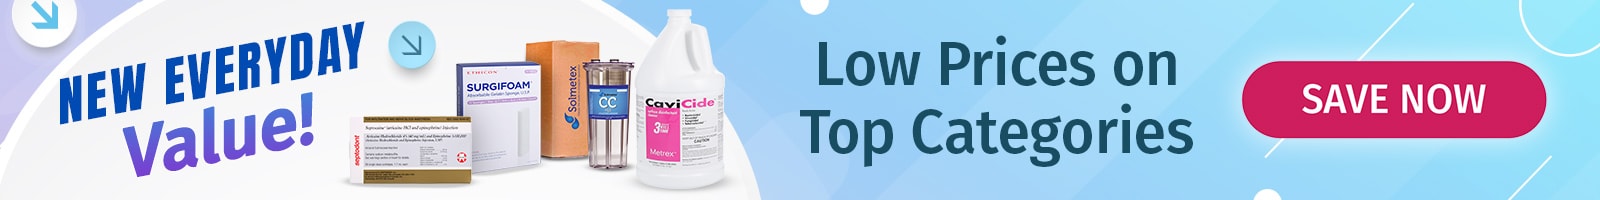 Low Prices on Best Selling Dental Products